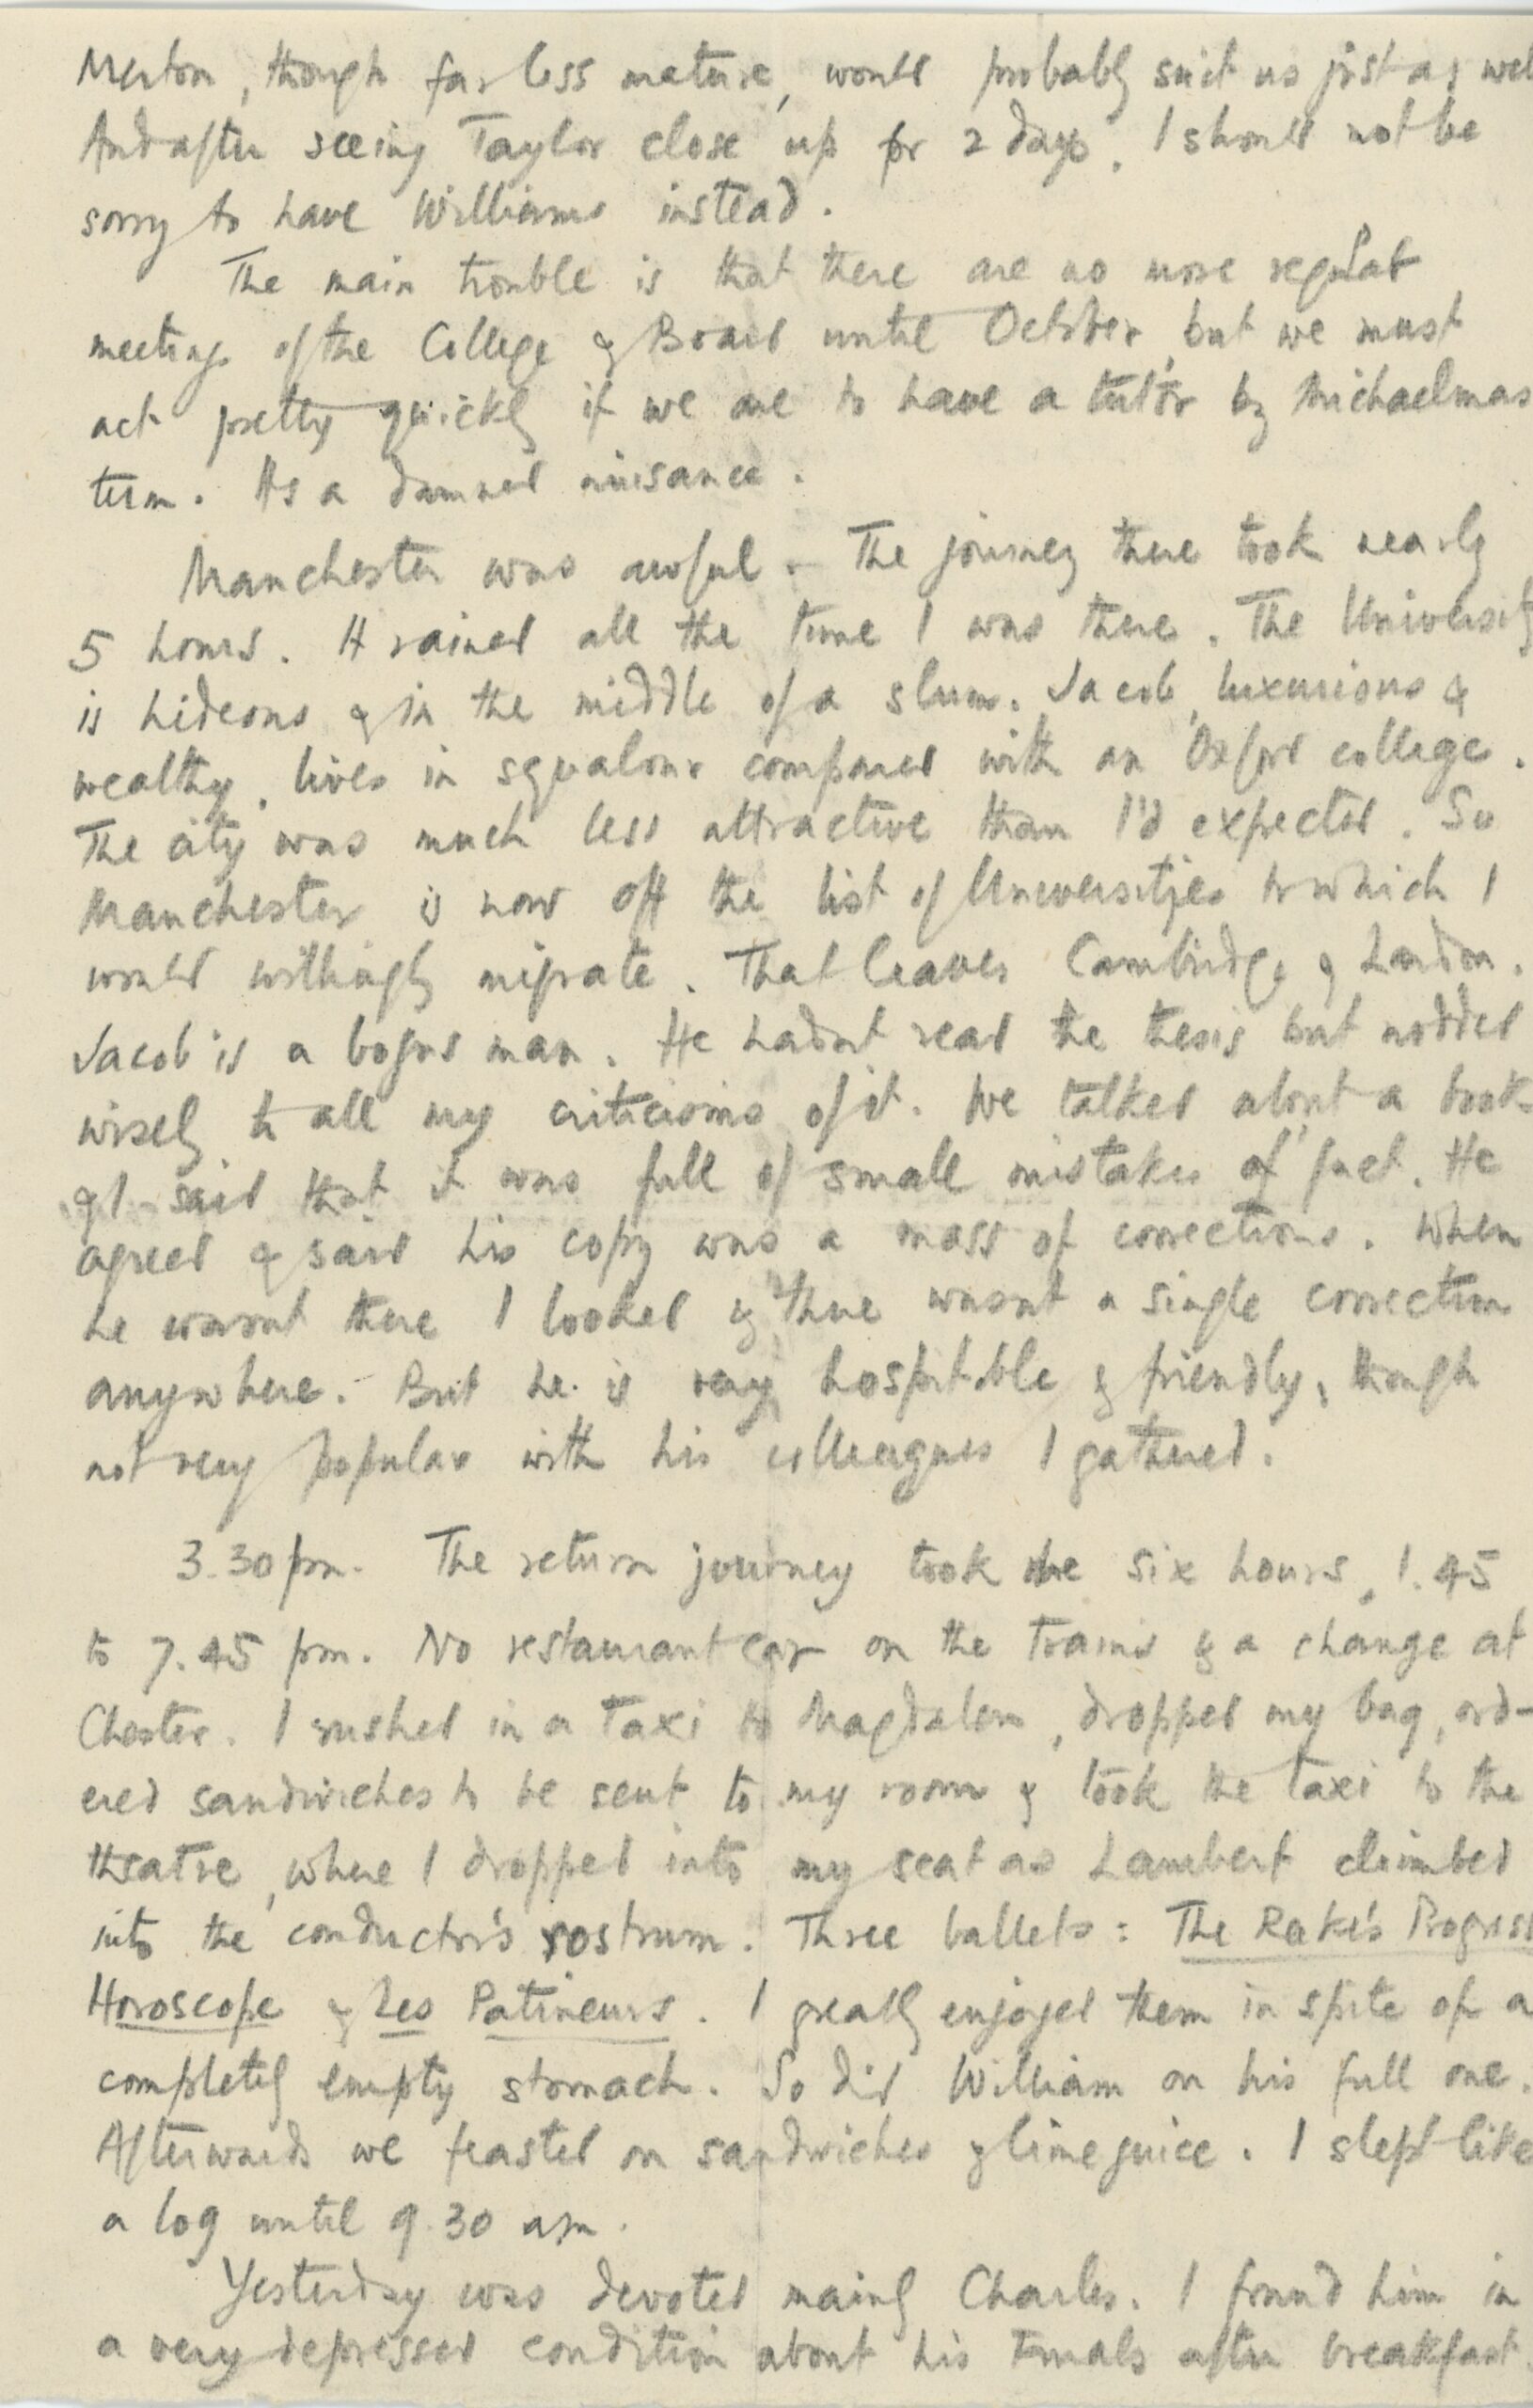 Third page of a handwritten letter on a small sheet of paper. The text, written in pencil, reads: Merton, though far less mature, would probably suit just as well. And after seeing Taylor close up for 2 days, I should not be sorry to have Williams instead. The main trouble is that there are as more regular meetings of the College & board until October, but we must act pretty quickly if we are to have a tutor by Michaelmas Term. It’s a damned nuisance. Manchester was awful. The journey took nearly 5 hours. It rained all the time I was there. The university is hideous & in the middle of a slum. Jacob, luxurious & wealthy, lives in squalor compared with an Oxford college. The city was less attractive than I expected. So Manchester is now off the list of Universities to which I would willingly migrate. That leaves Cambridge & London. Jacob is a [bogus?] man. He hadn’t read the thesis but nodded wisely to all my criticisms of it. We talked about a book & I said that it was full of small mistakes of fact. He agreed & said his copy was a mass of corrections. When he wasn’t there I looked & there wasn’t a single correction anywhere. But he is very hospitable & friendly, though not very popular with his colleagues I gathered. 3.30pm The return journey took six hours, 1:45 to 7:45pm. No restaurant on the trains & a change at Chester. I rushed in a Taxi to Magdalen, dropped my bag, ordered sandwiches to be sent to my room & took a taxi to the theatre, where I dropped into my seat as Lambert climbed into the conductor’s rostrum. Three ballets: The Rake’s Progress, Horoscope & Les Patineurs. I greatly enjoyed them in spite of the completely empty stomach. So did William on his full one. Afterwards we feasted on sandwiches & lime juice. I slept like a log until 9:30am. Yesterday was devoted mainly Charles. I found him in a very depressed condition about his Finals after breakfast.